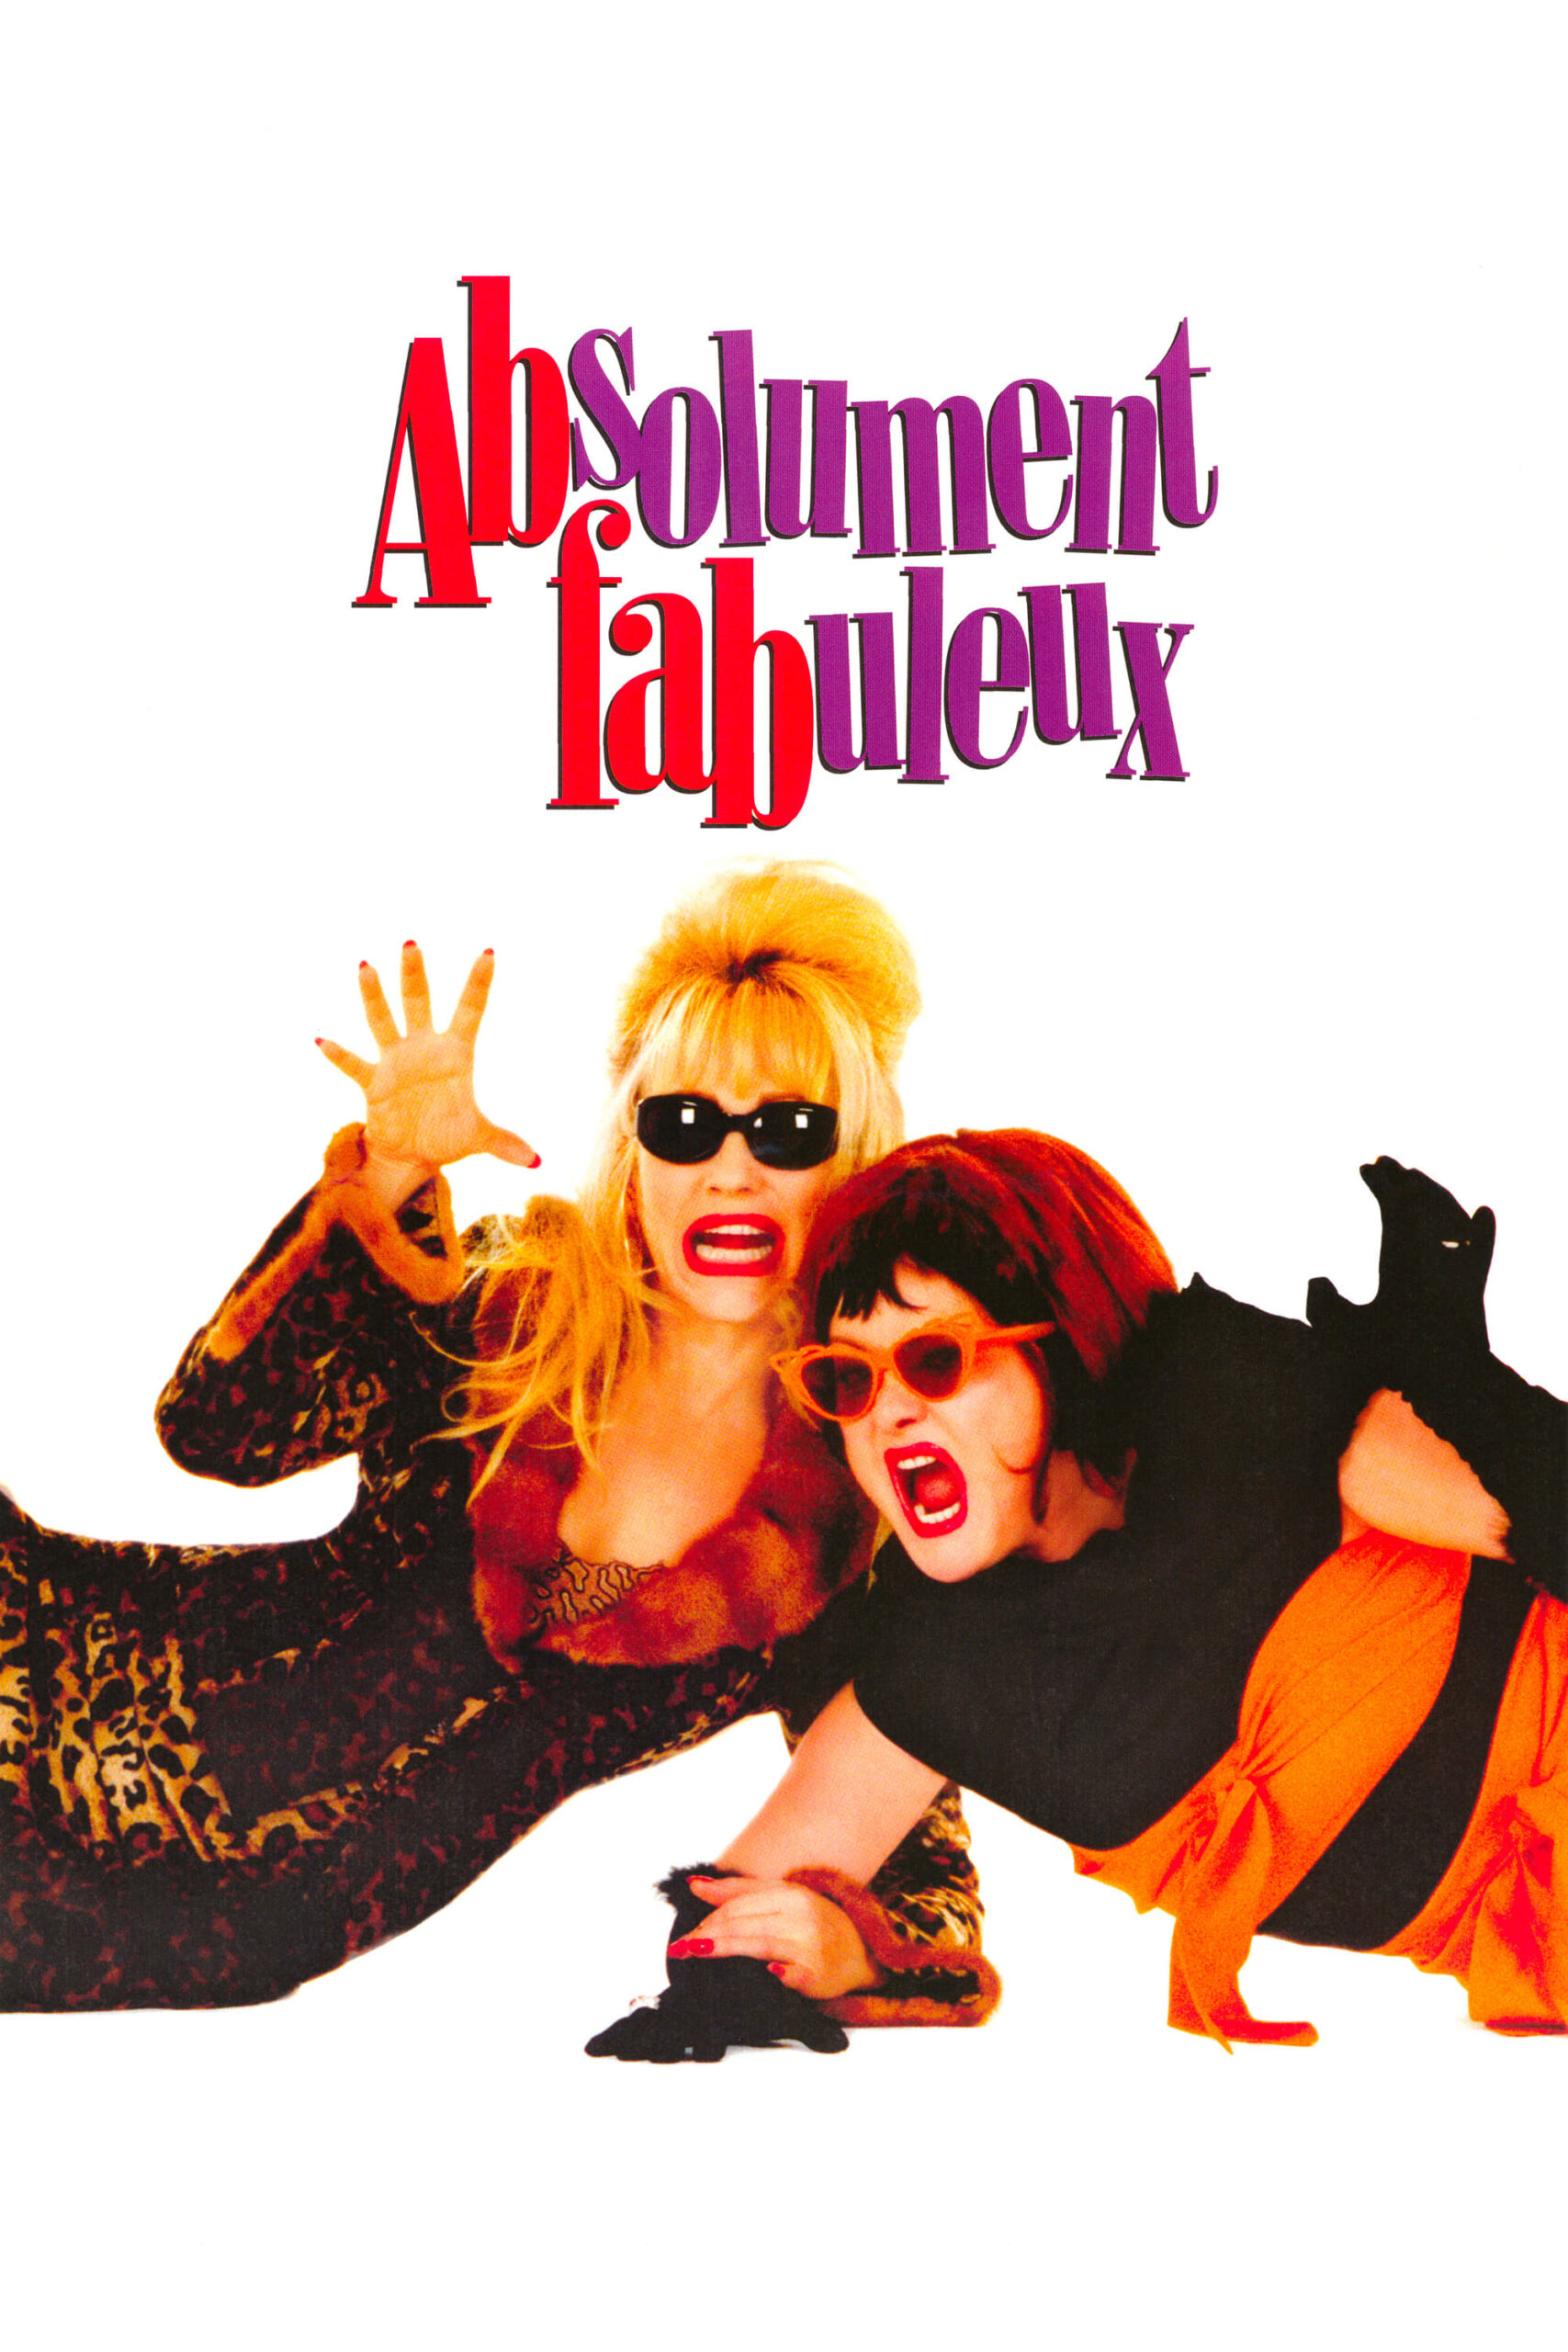 Poster for the movie "Absolutely Fabulous"